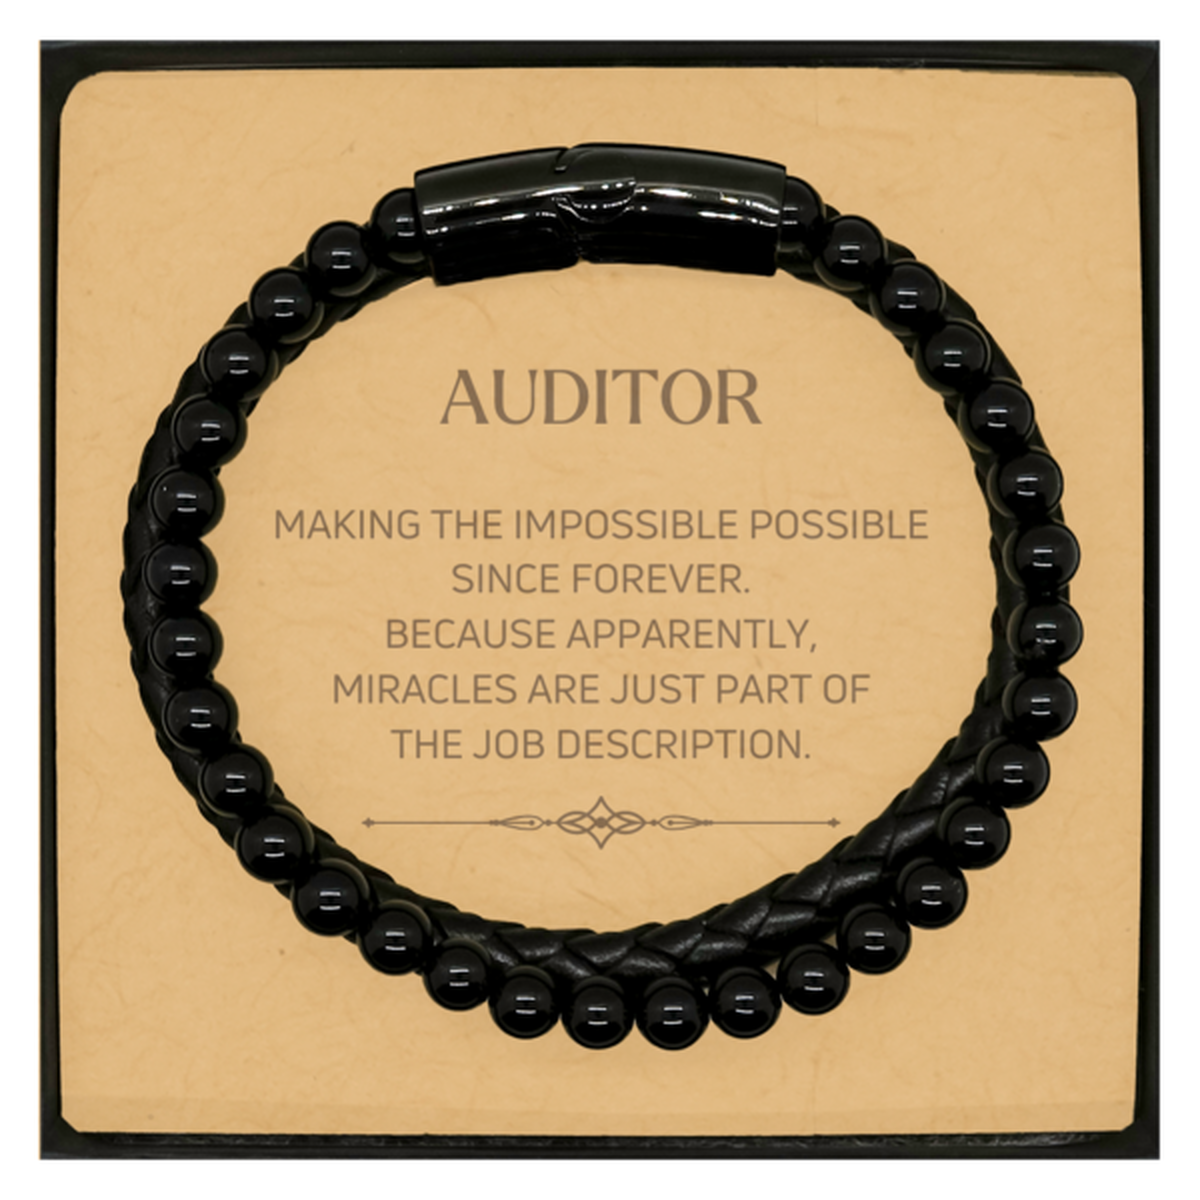 Funny Auditor Gifts, Miracles are just part of the job description, Inspirational Birthday Christmas Stone Leather Bracelets For Auditor, Men, Women, Coworkers, Friends, Boss